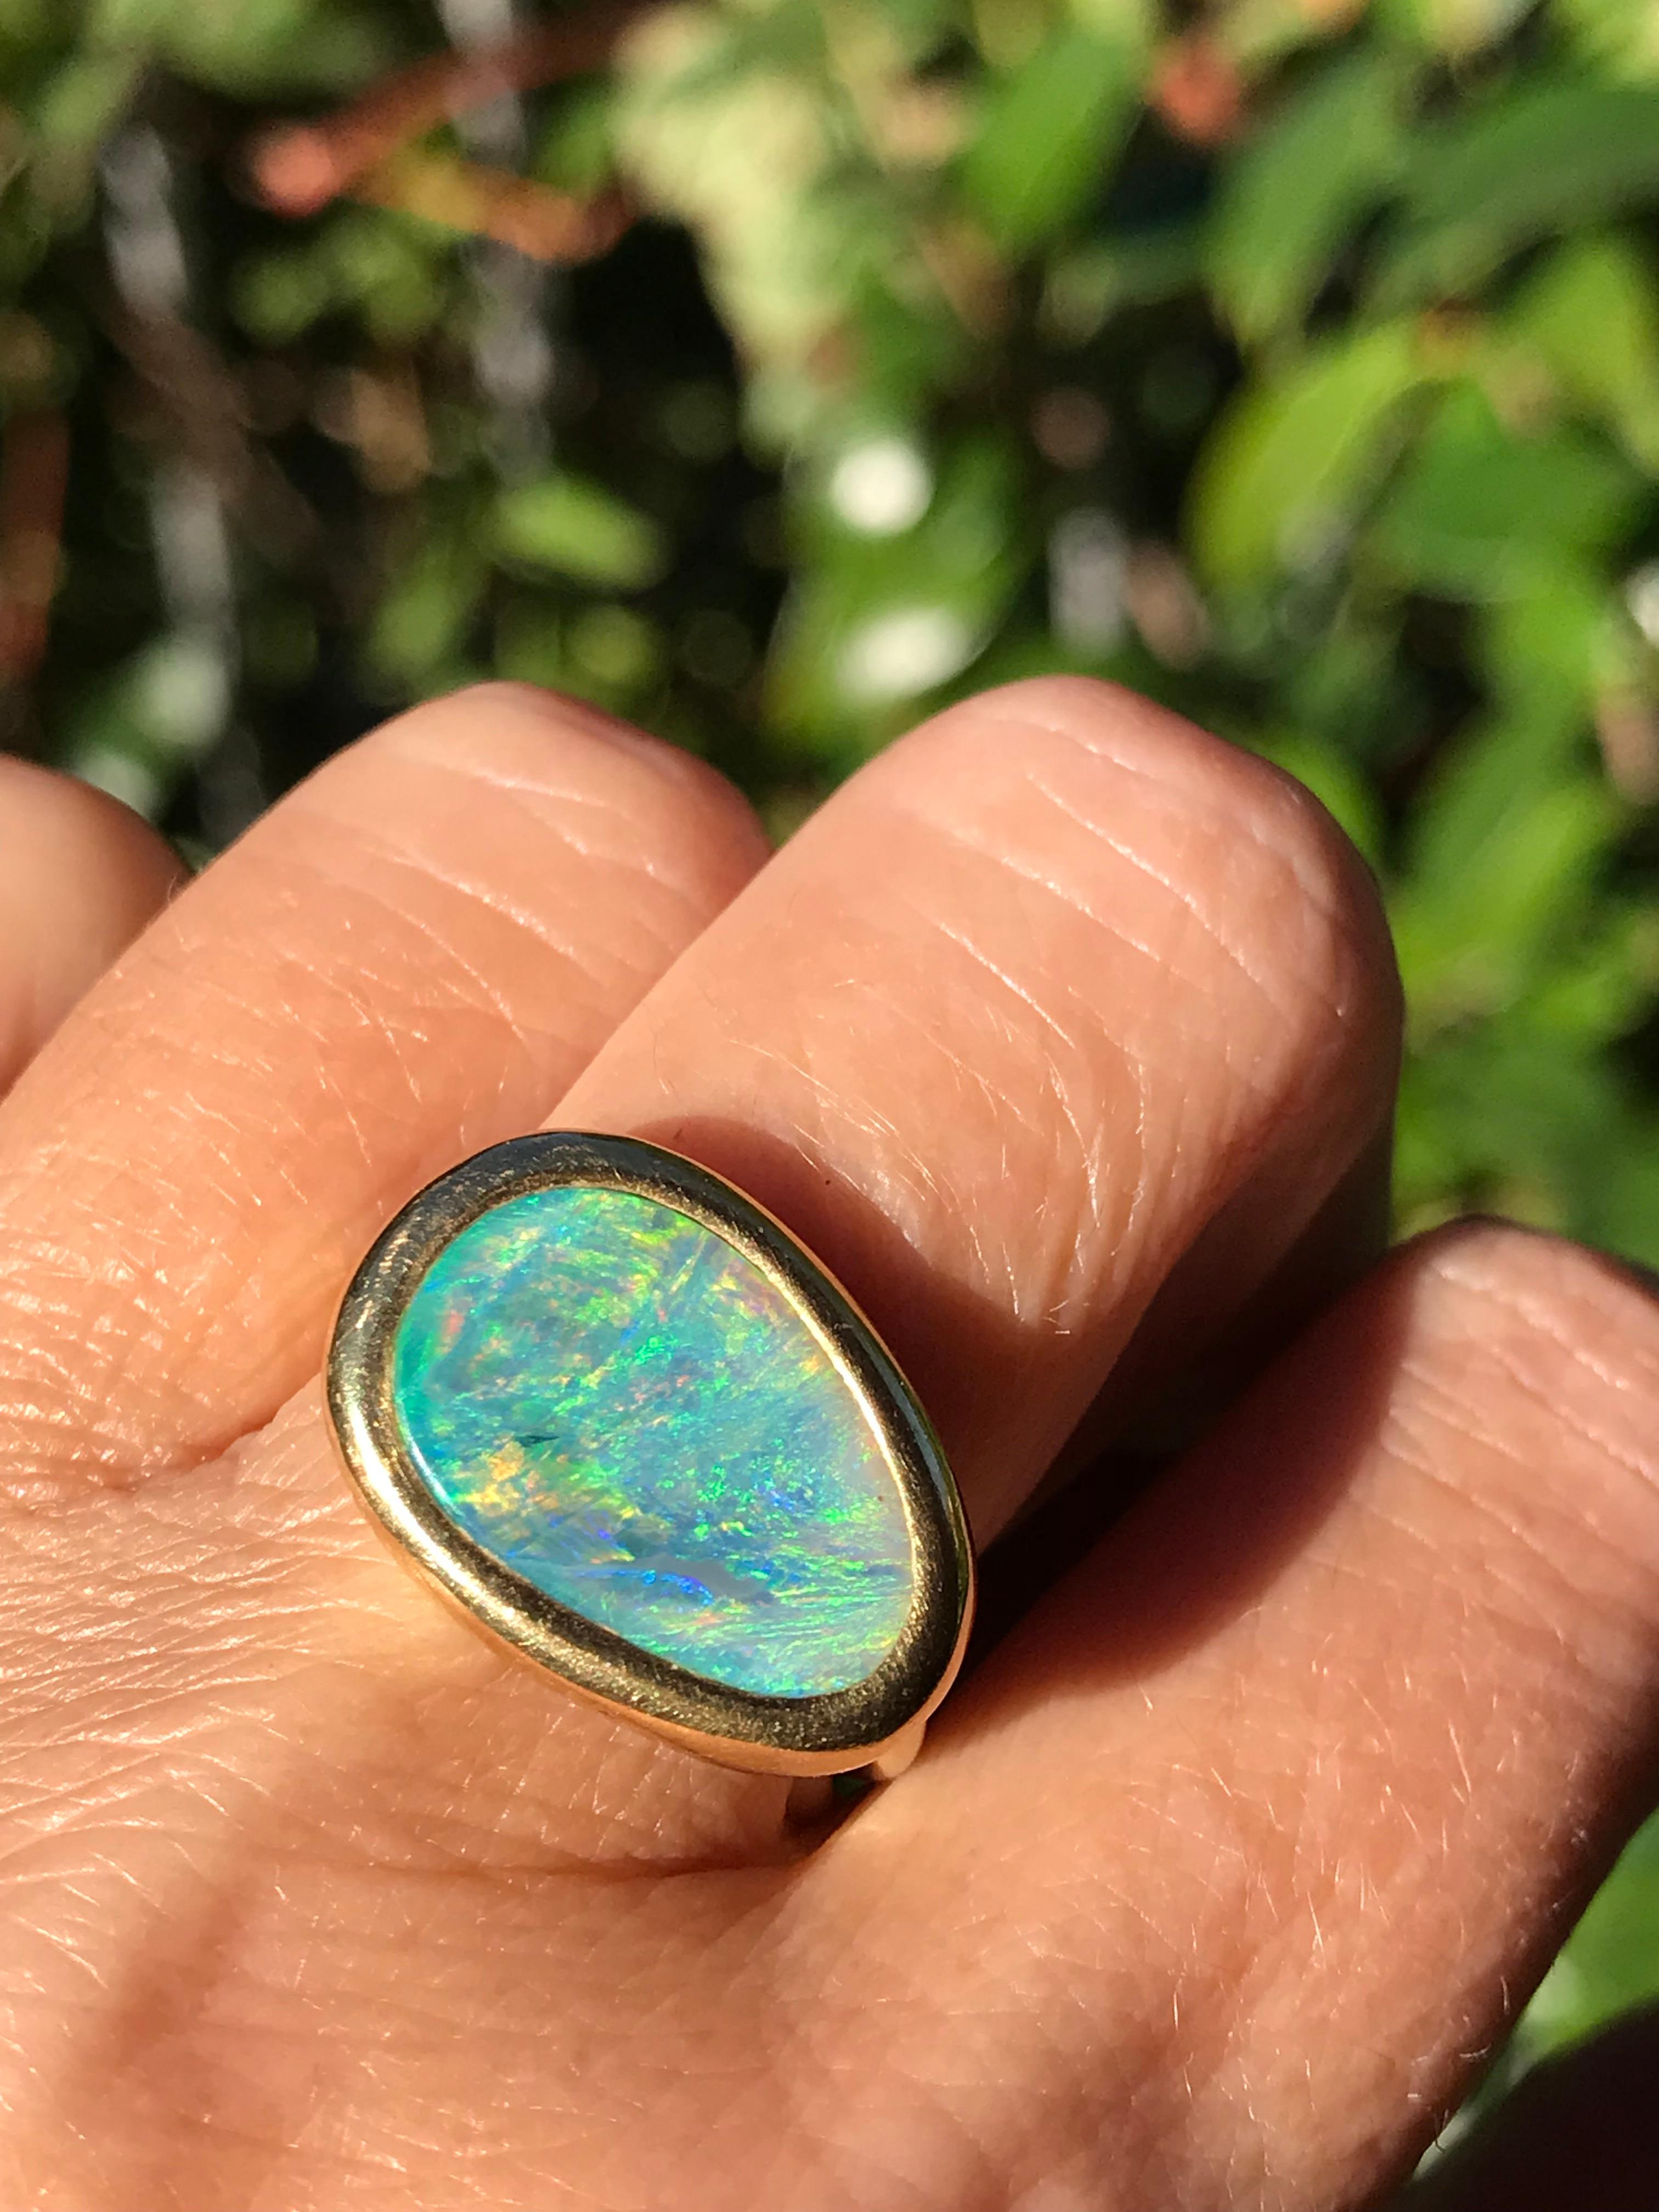 Dalben design One of a kind 18k yellow gold satin finishing ring with a 3,4 carat bezel-set lovely Australian Lightning Ridge Opal .  
The stone colors looks like a Sardinia bay sea .  
Ring size 6 3/4 - EU 54 re-sizable to most finger sizes. 